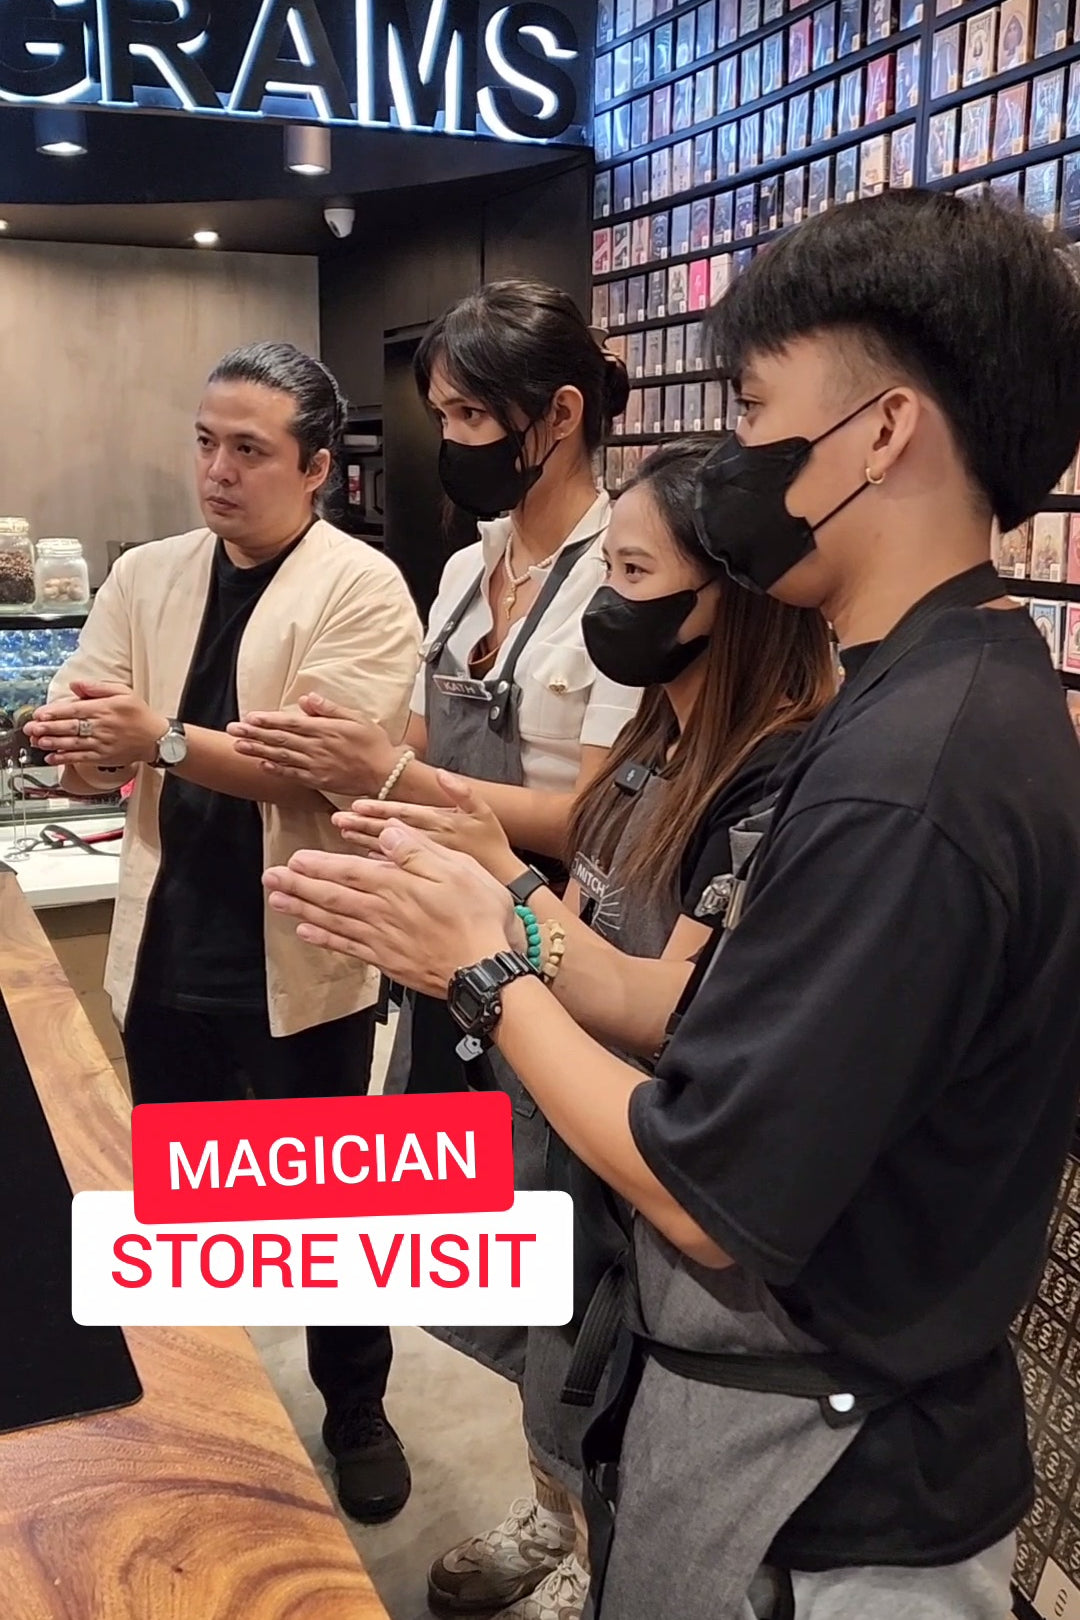 Our Magician Friends Visited Us!